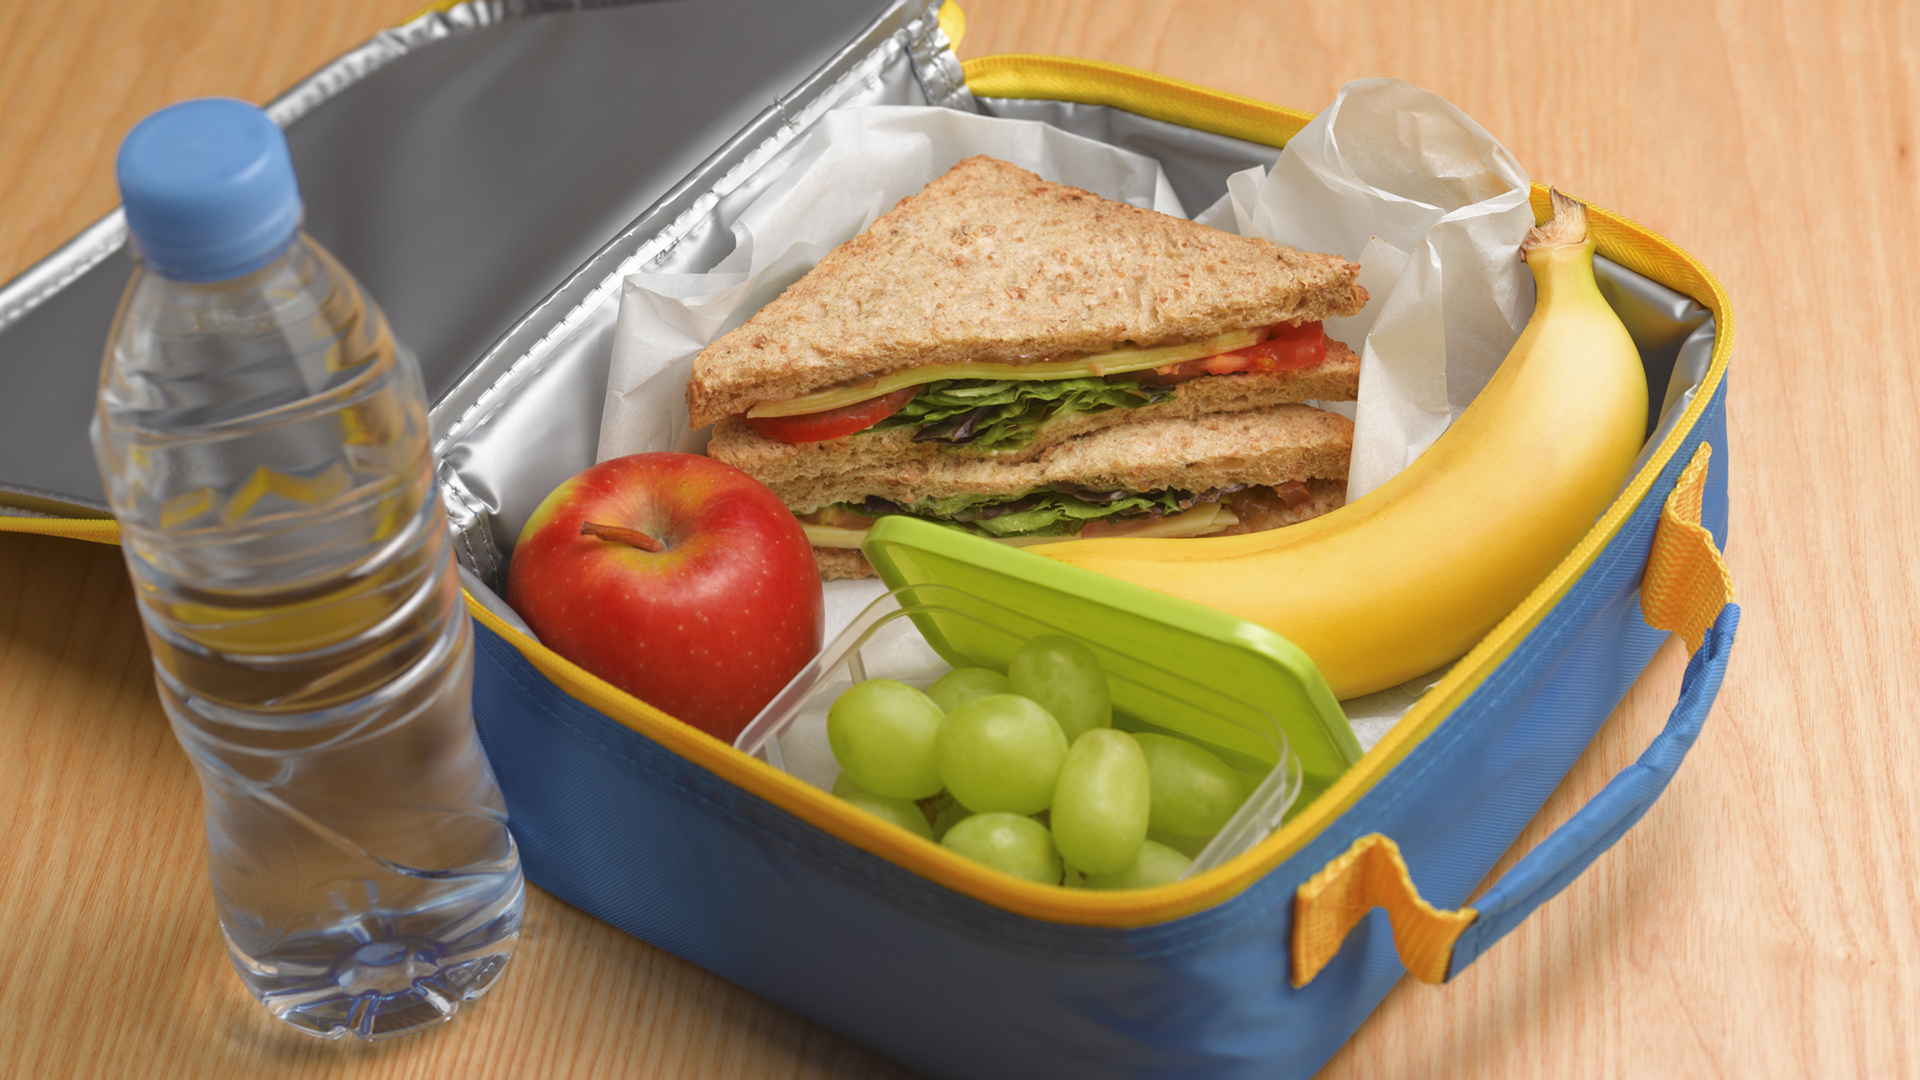 How to clean lunch boxes, thermoses and coffee mugs